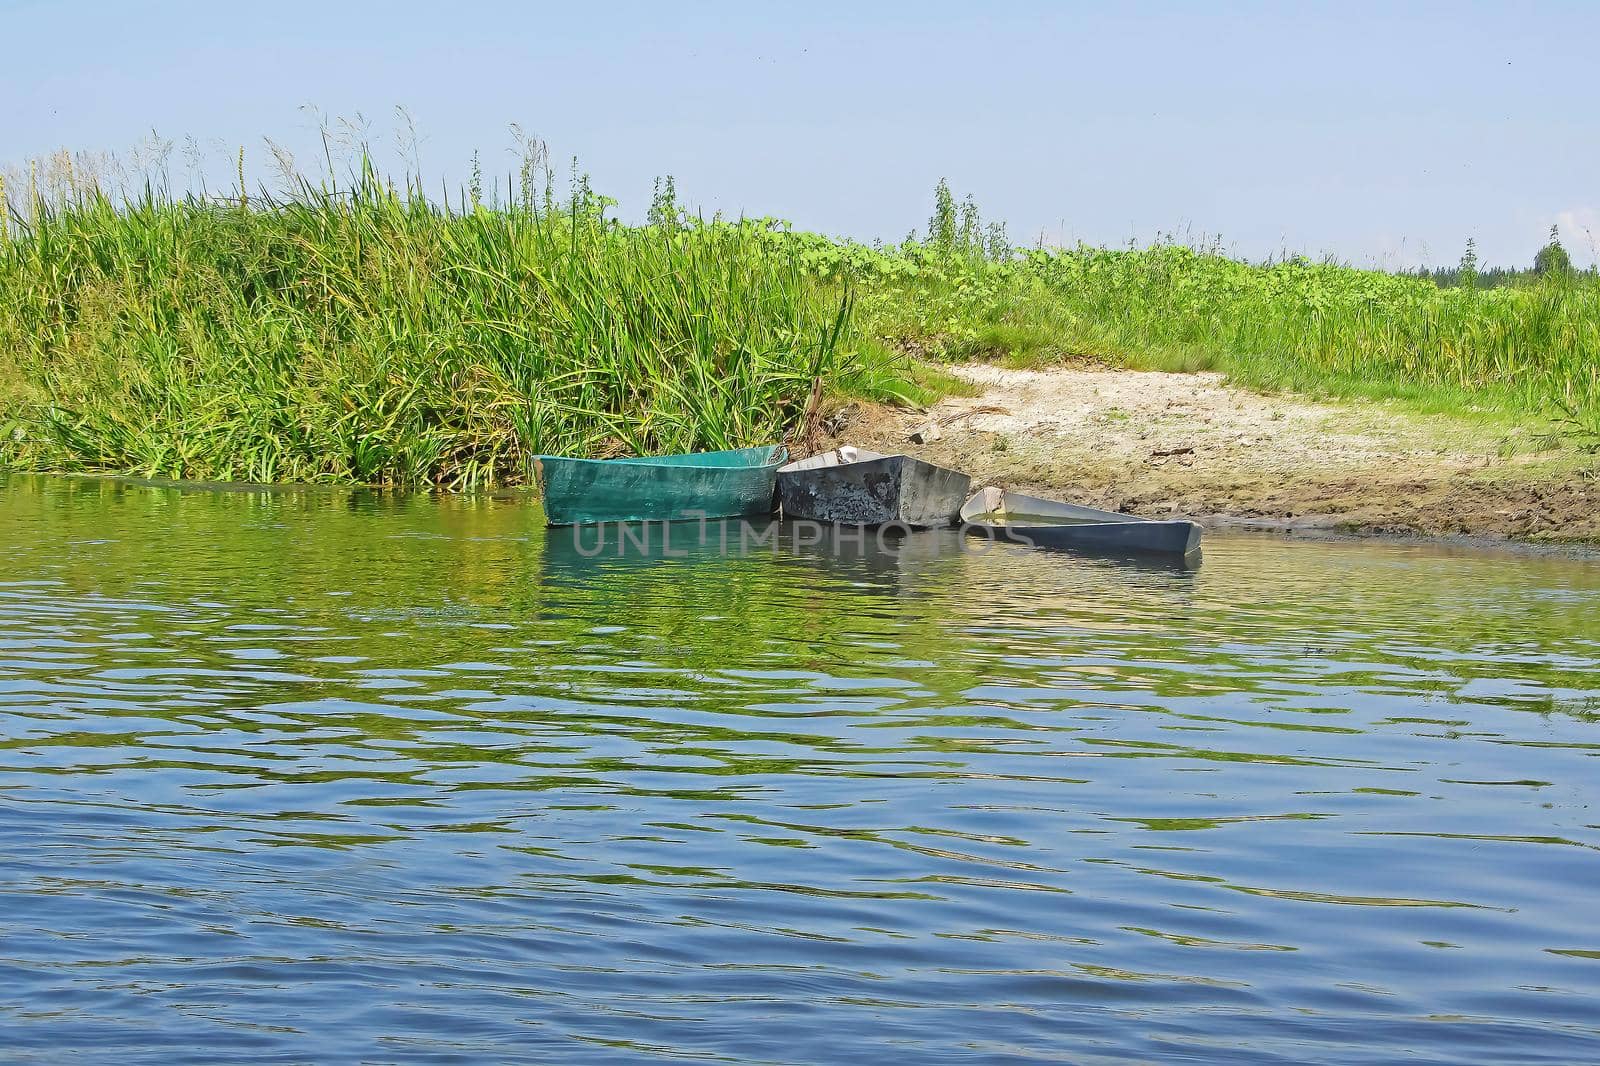 Three boats in the reeds. Abandoned boat on the river without people. Wrecked boats on a green background on image